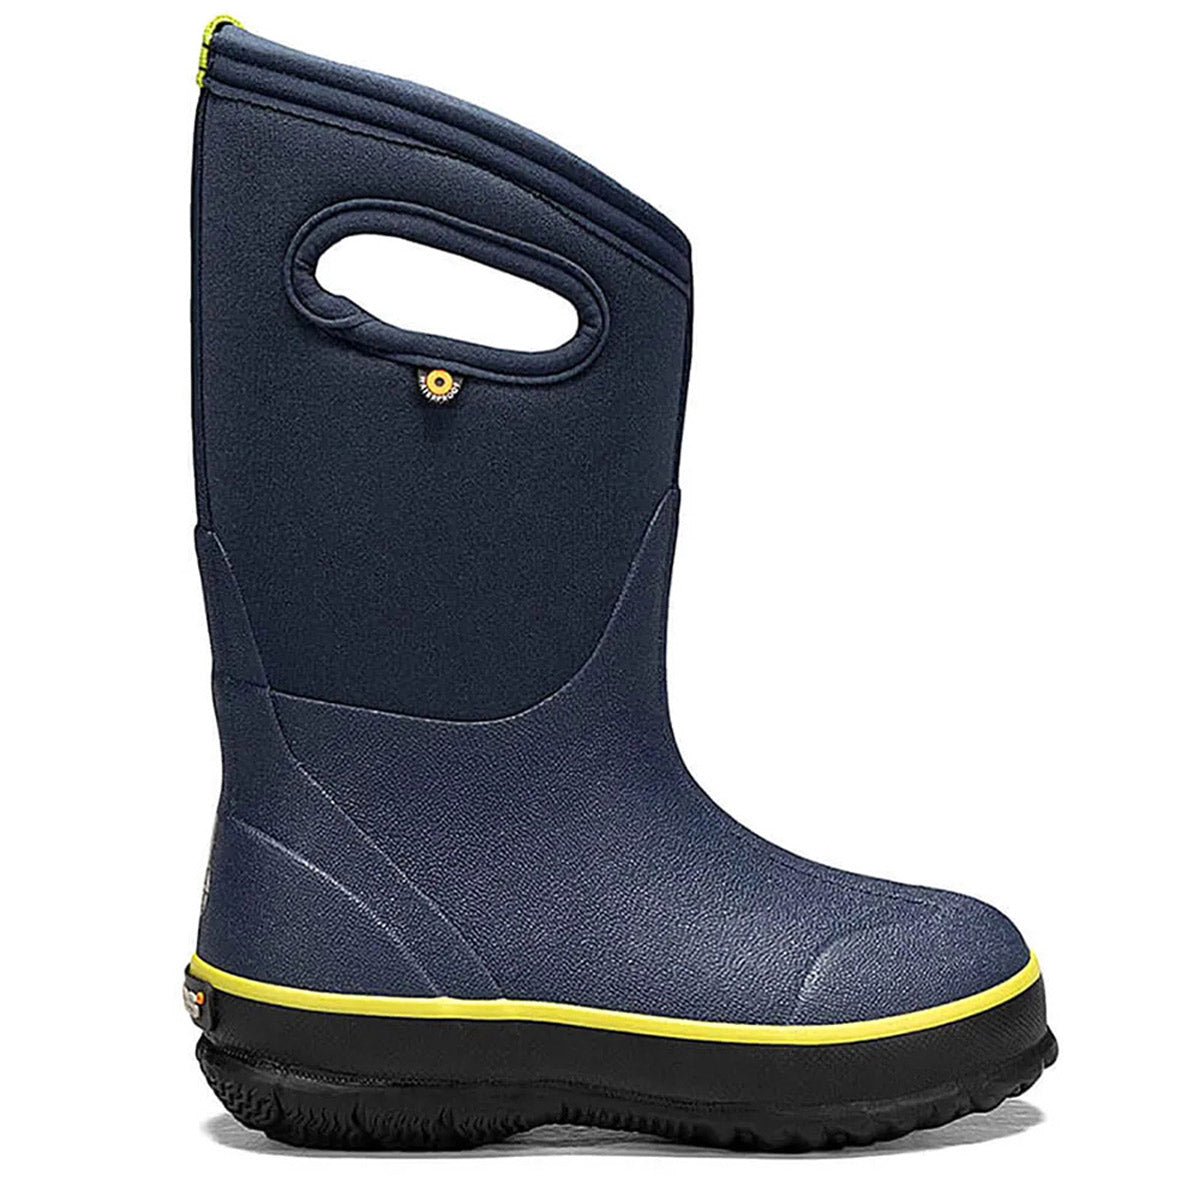 Navy blue Bogs Classic Texture Solid Navy - Kids boot with handle and yellow trim, featuring Neo-Tech insulation.